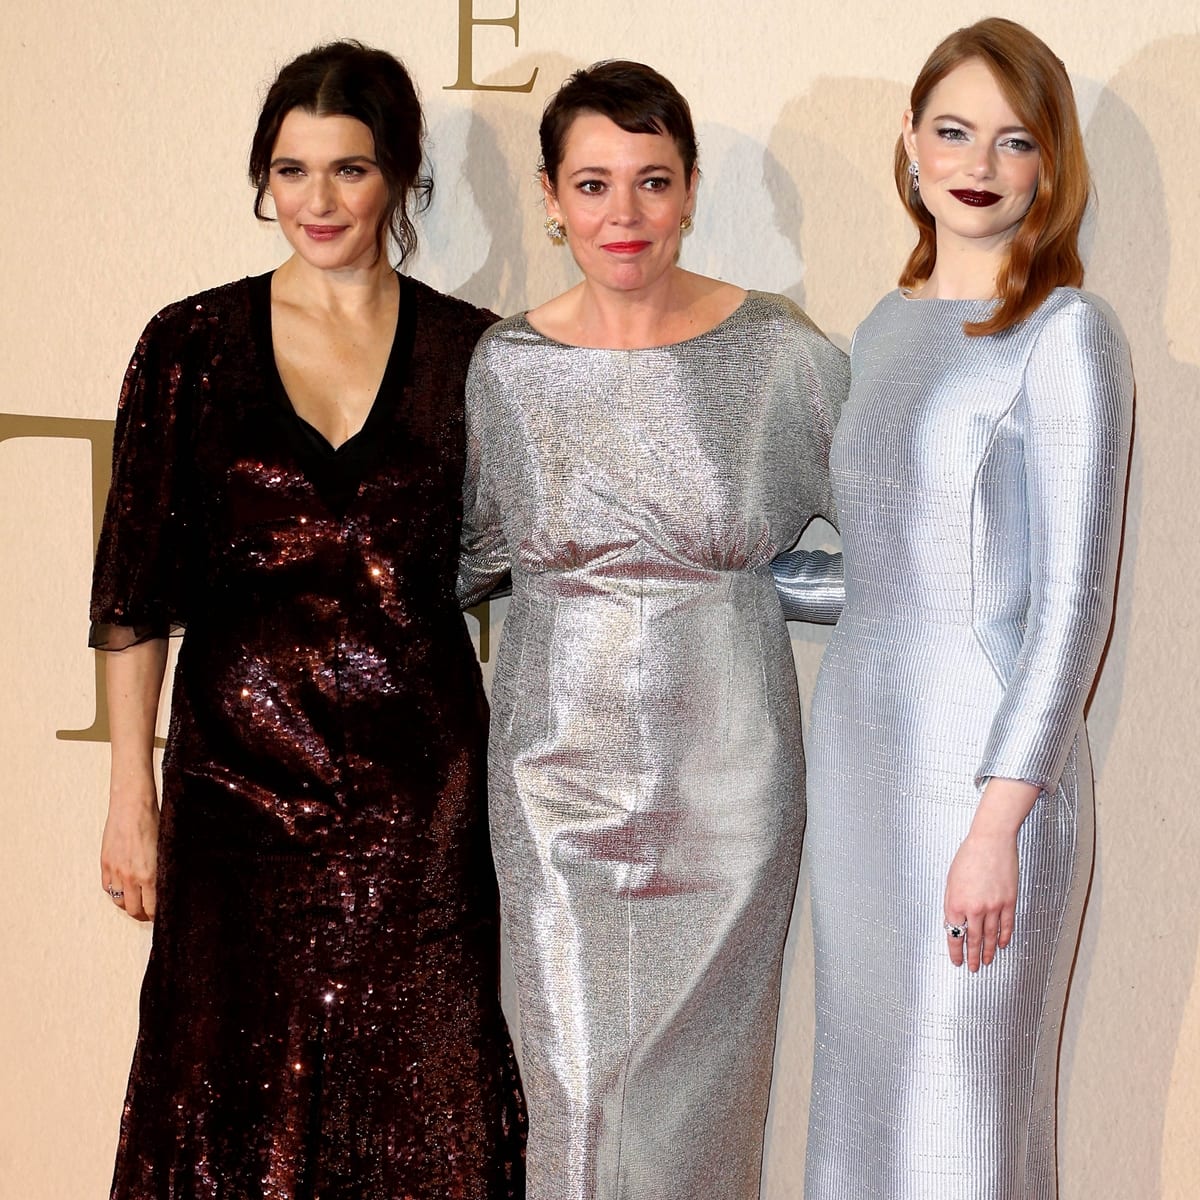 Rachel Weisz, Olivia Colman, and Emma Stone attend the UK Premiere of "The Favourite"